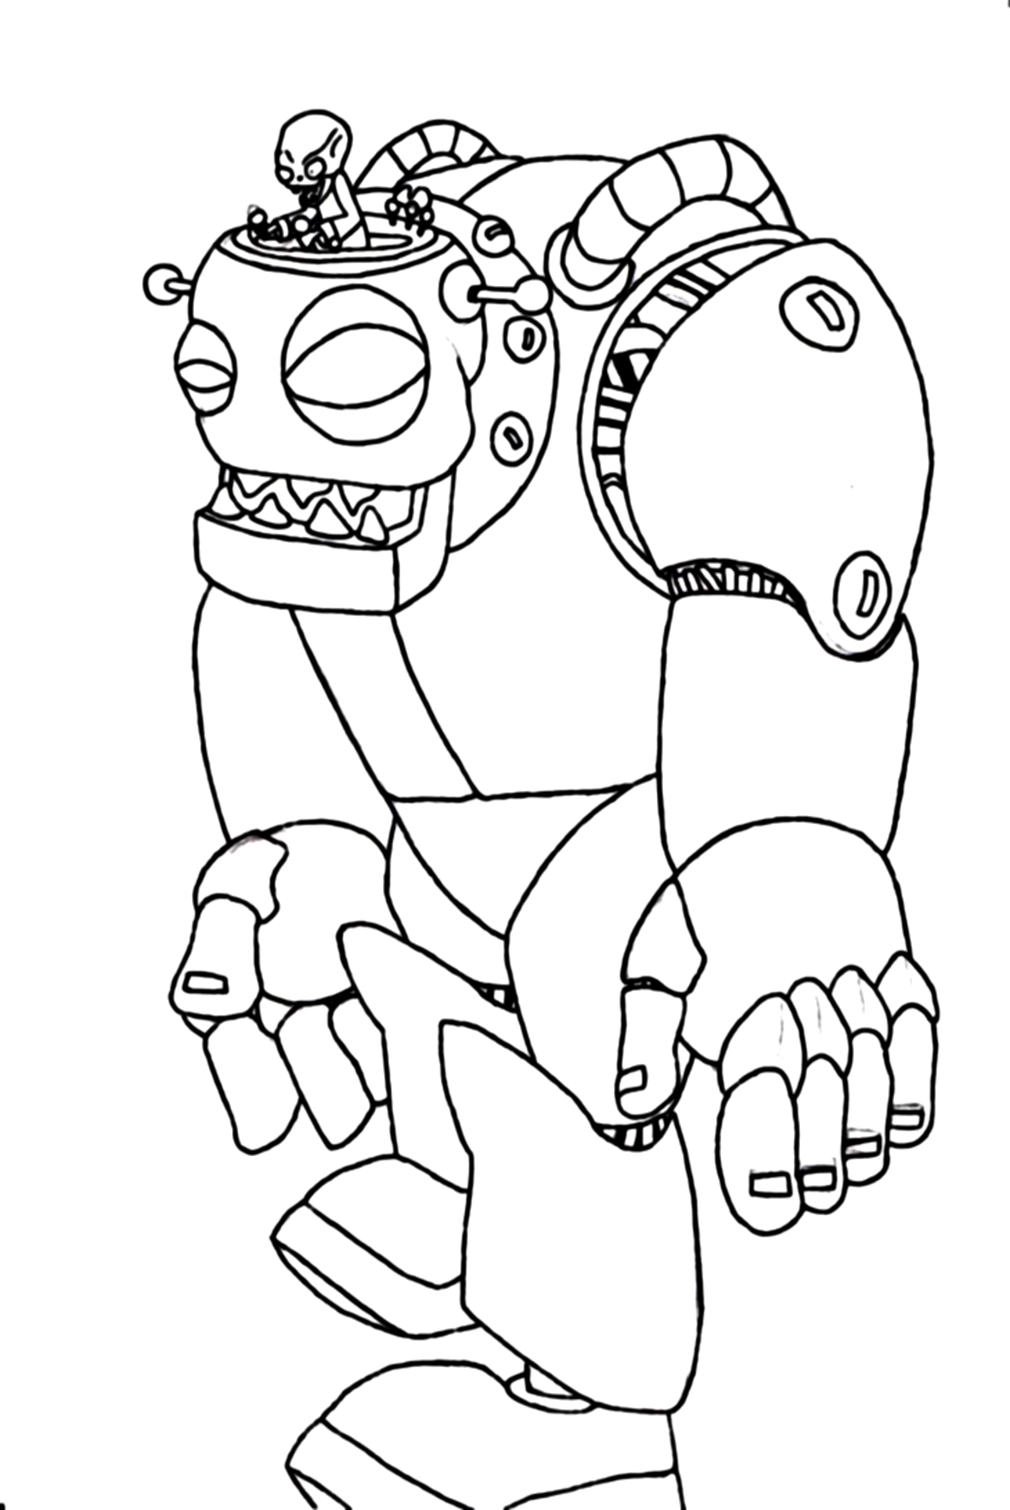 Dr. Zomboss From Plants Vs Zombies Coloring Pages